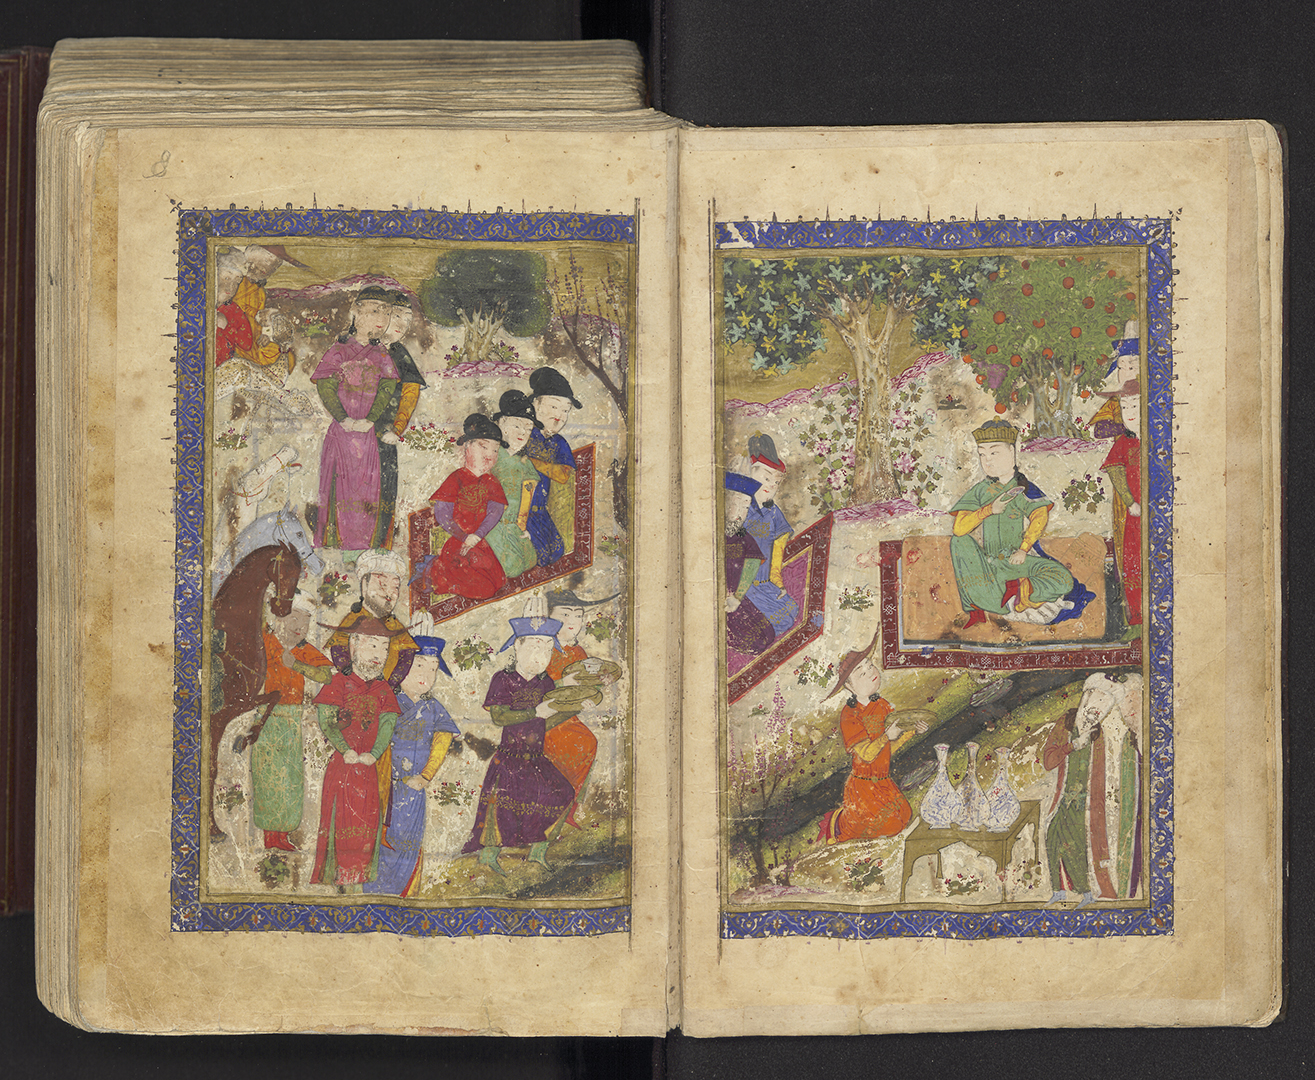 Digitised Leiden Middle Eastern collections available in Digital Collections - Leiden University